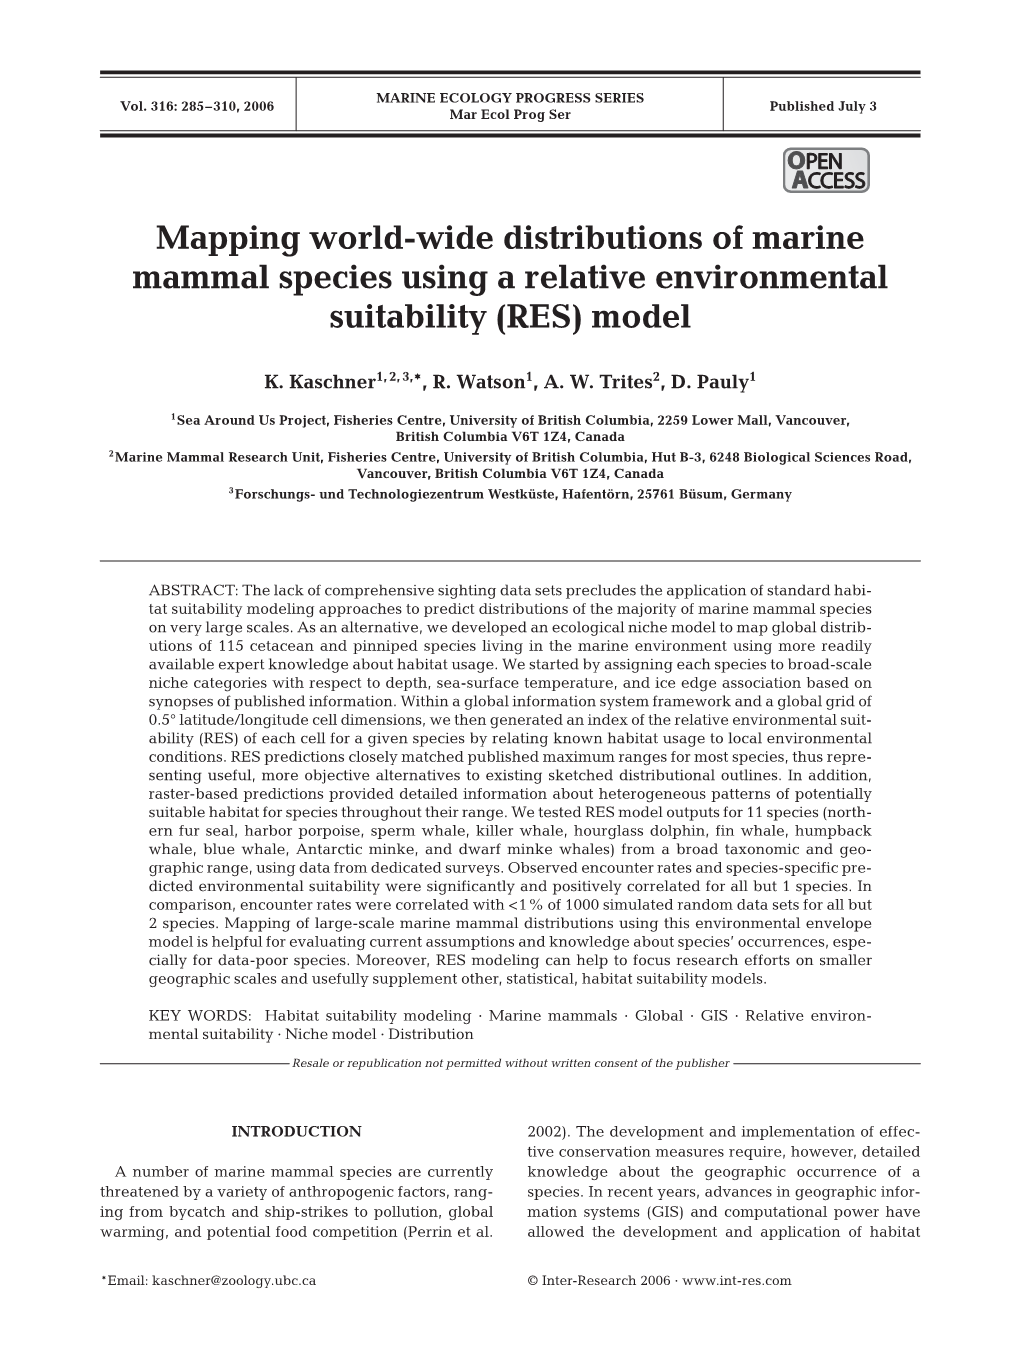 Mapping World-Wide Distributions of Marine Mammal Species Using a Relative Environmental Suitability (RES) Model